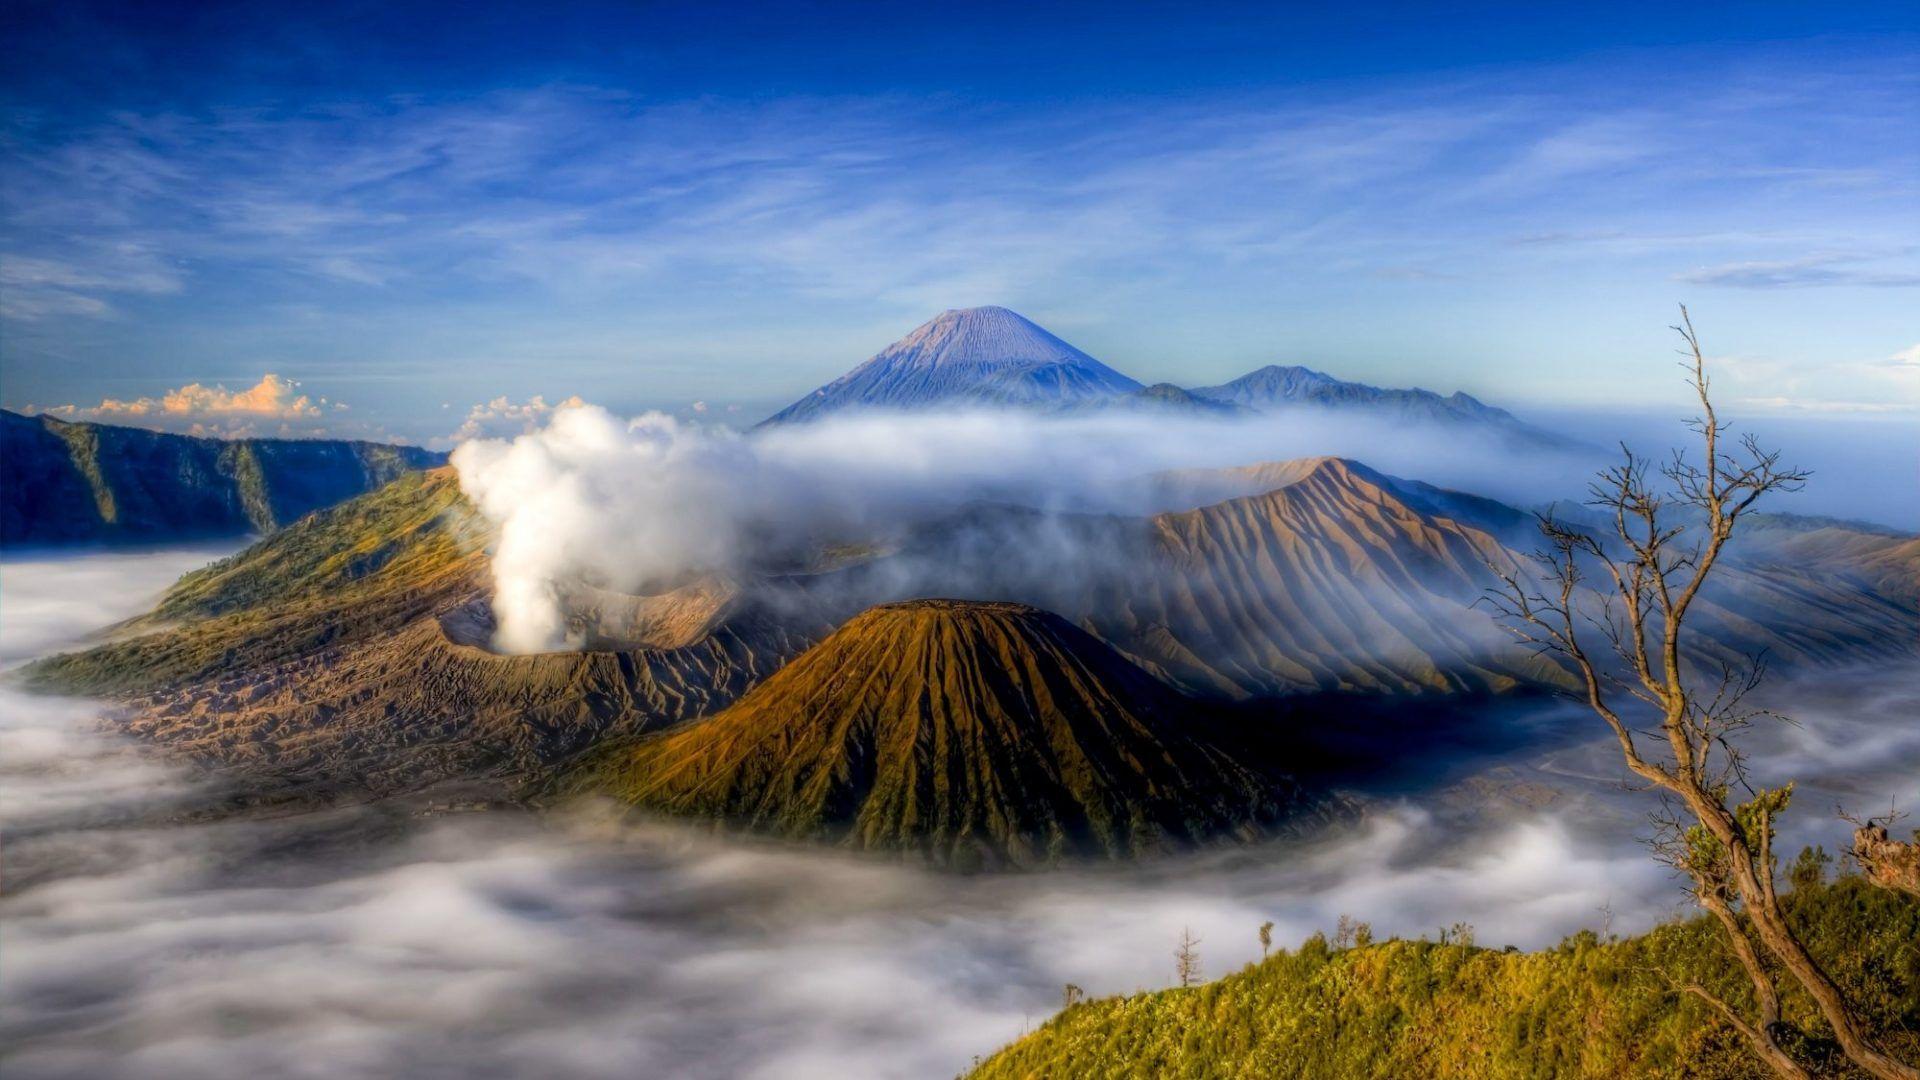 Wallpaper ID 304014  Earth Mount Bromo Phone Wallpaper Sunset Volcano  Indonesia Mountain 1440x3200 free download